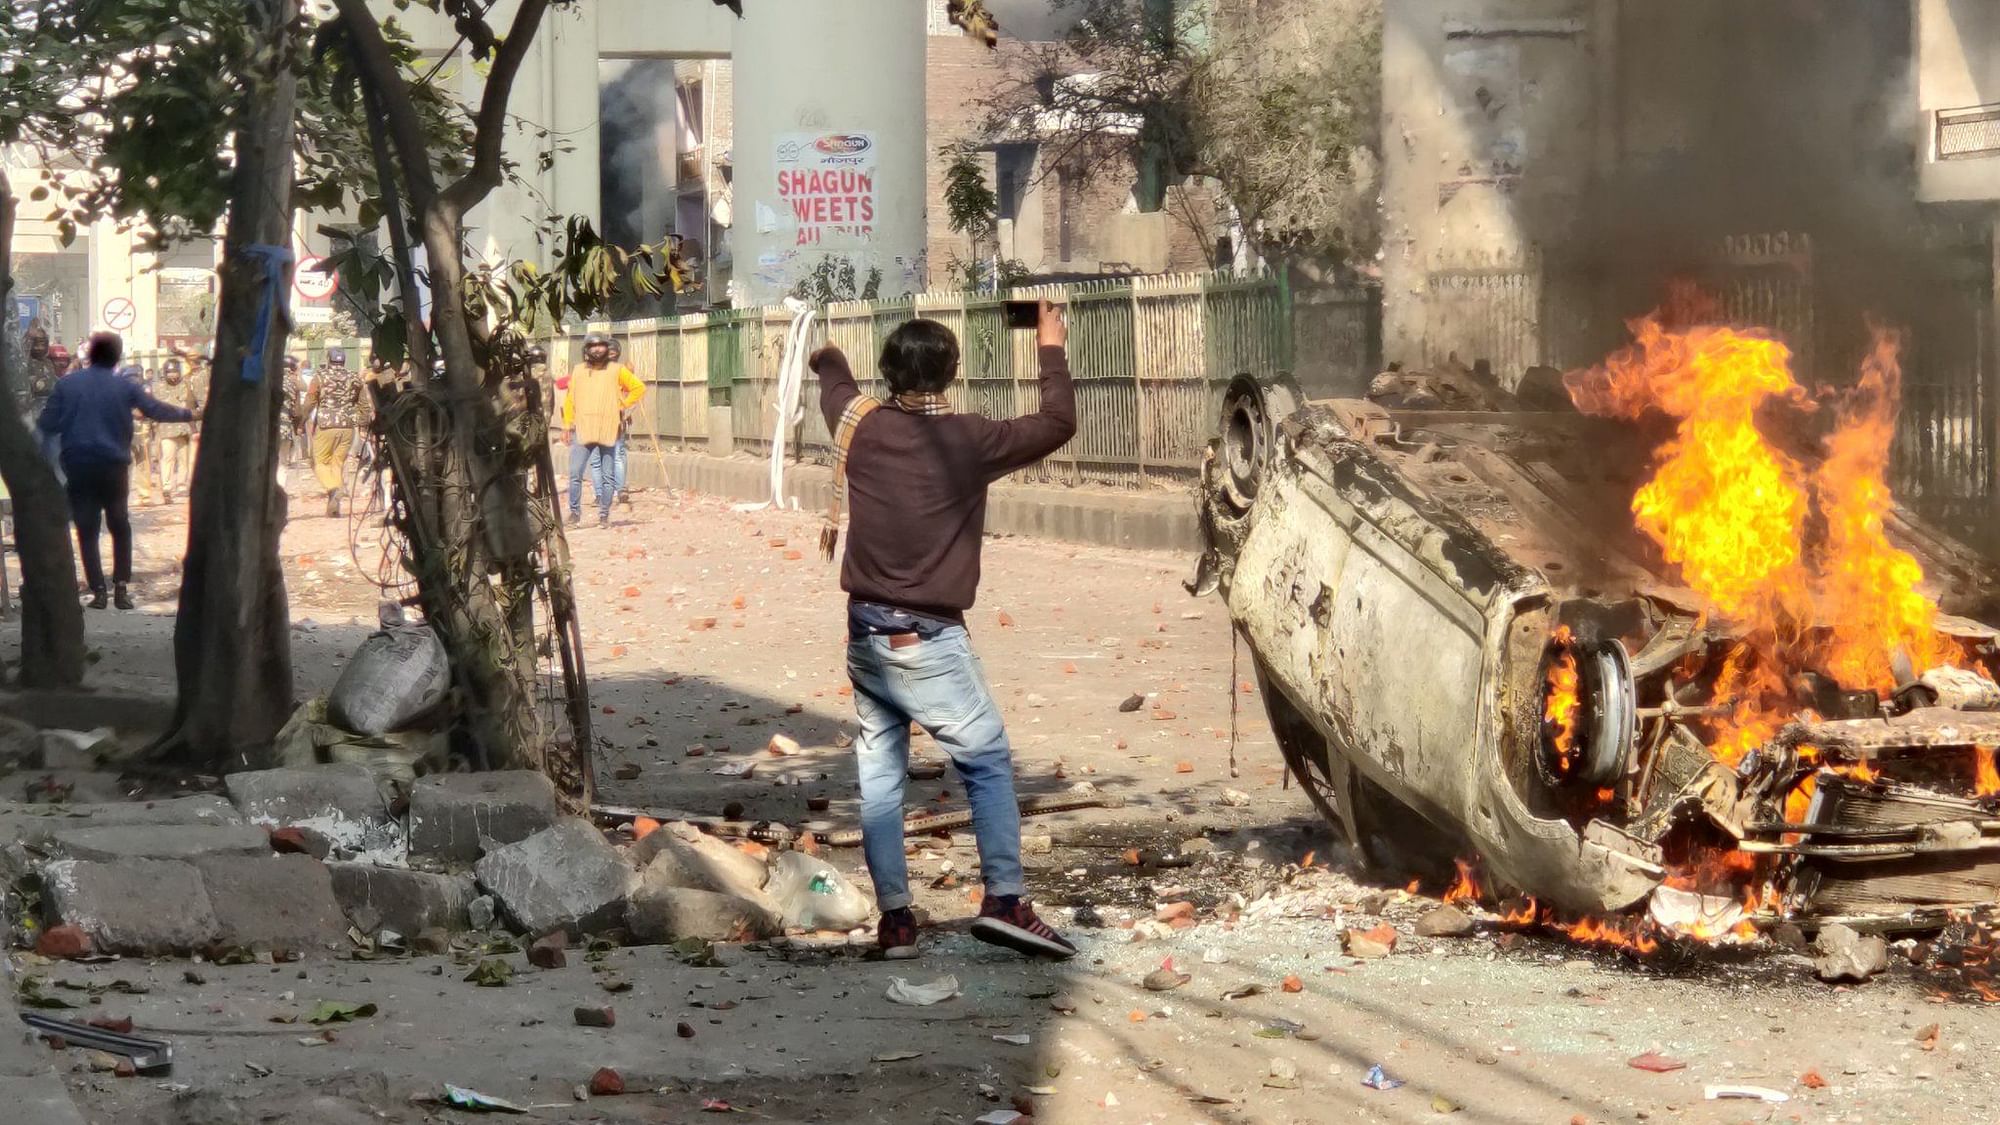 This vehicle was a kind of demarcation between the pro and anti-CAA protesters, during the violence on 24 February, at the Maujpur-Jaffrabad road, in northeast Delhi.